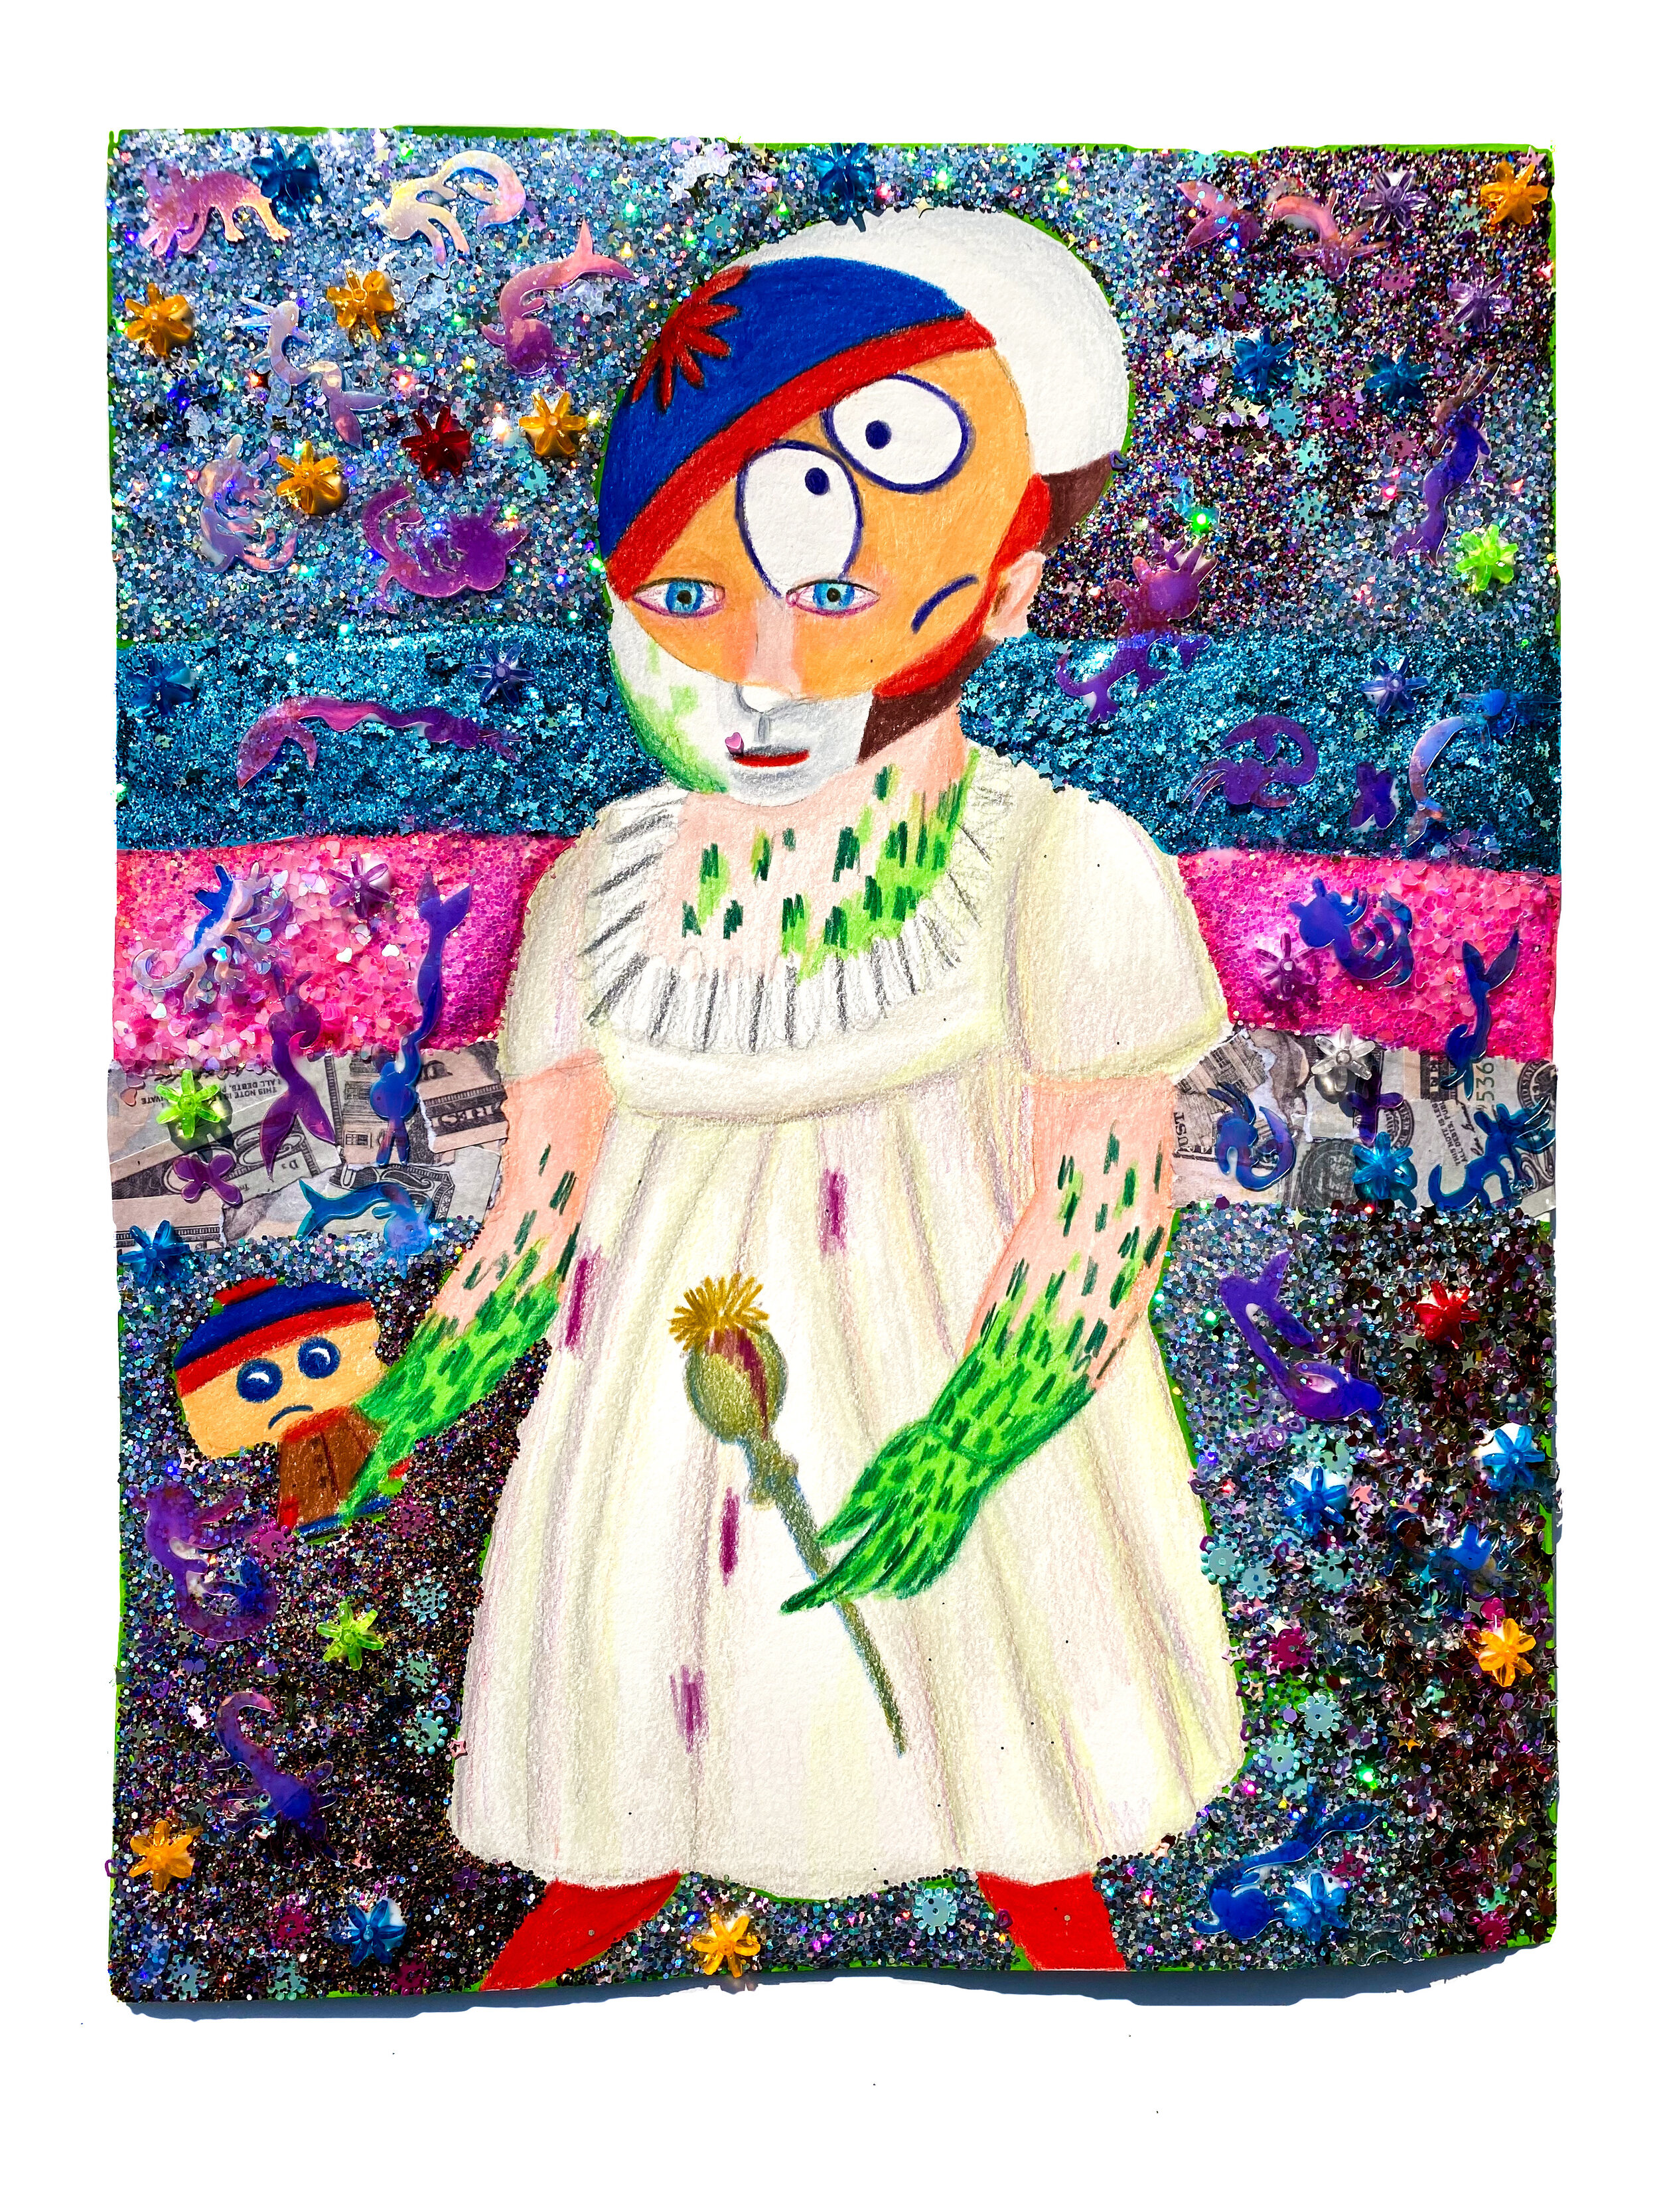   Baby with South Park Stan Face Paint Holding a Funko Pop and Poppy Pod,  2021  14 x 11 inches (38.1 x 27.94 cm.)  Colored pencil, acrylic paint, Elmer's glue, Modge Podge, and glitter, plastic beads, custom sequins, money on paper 